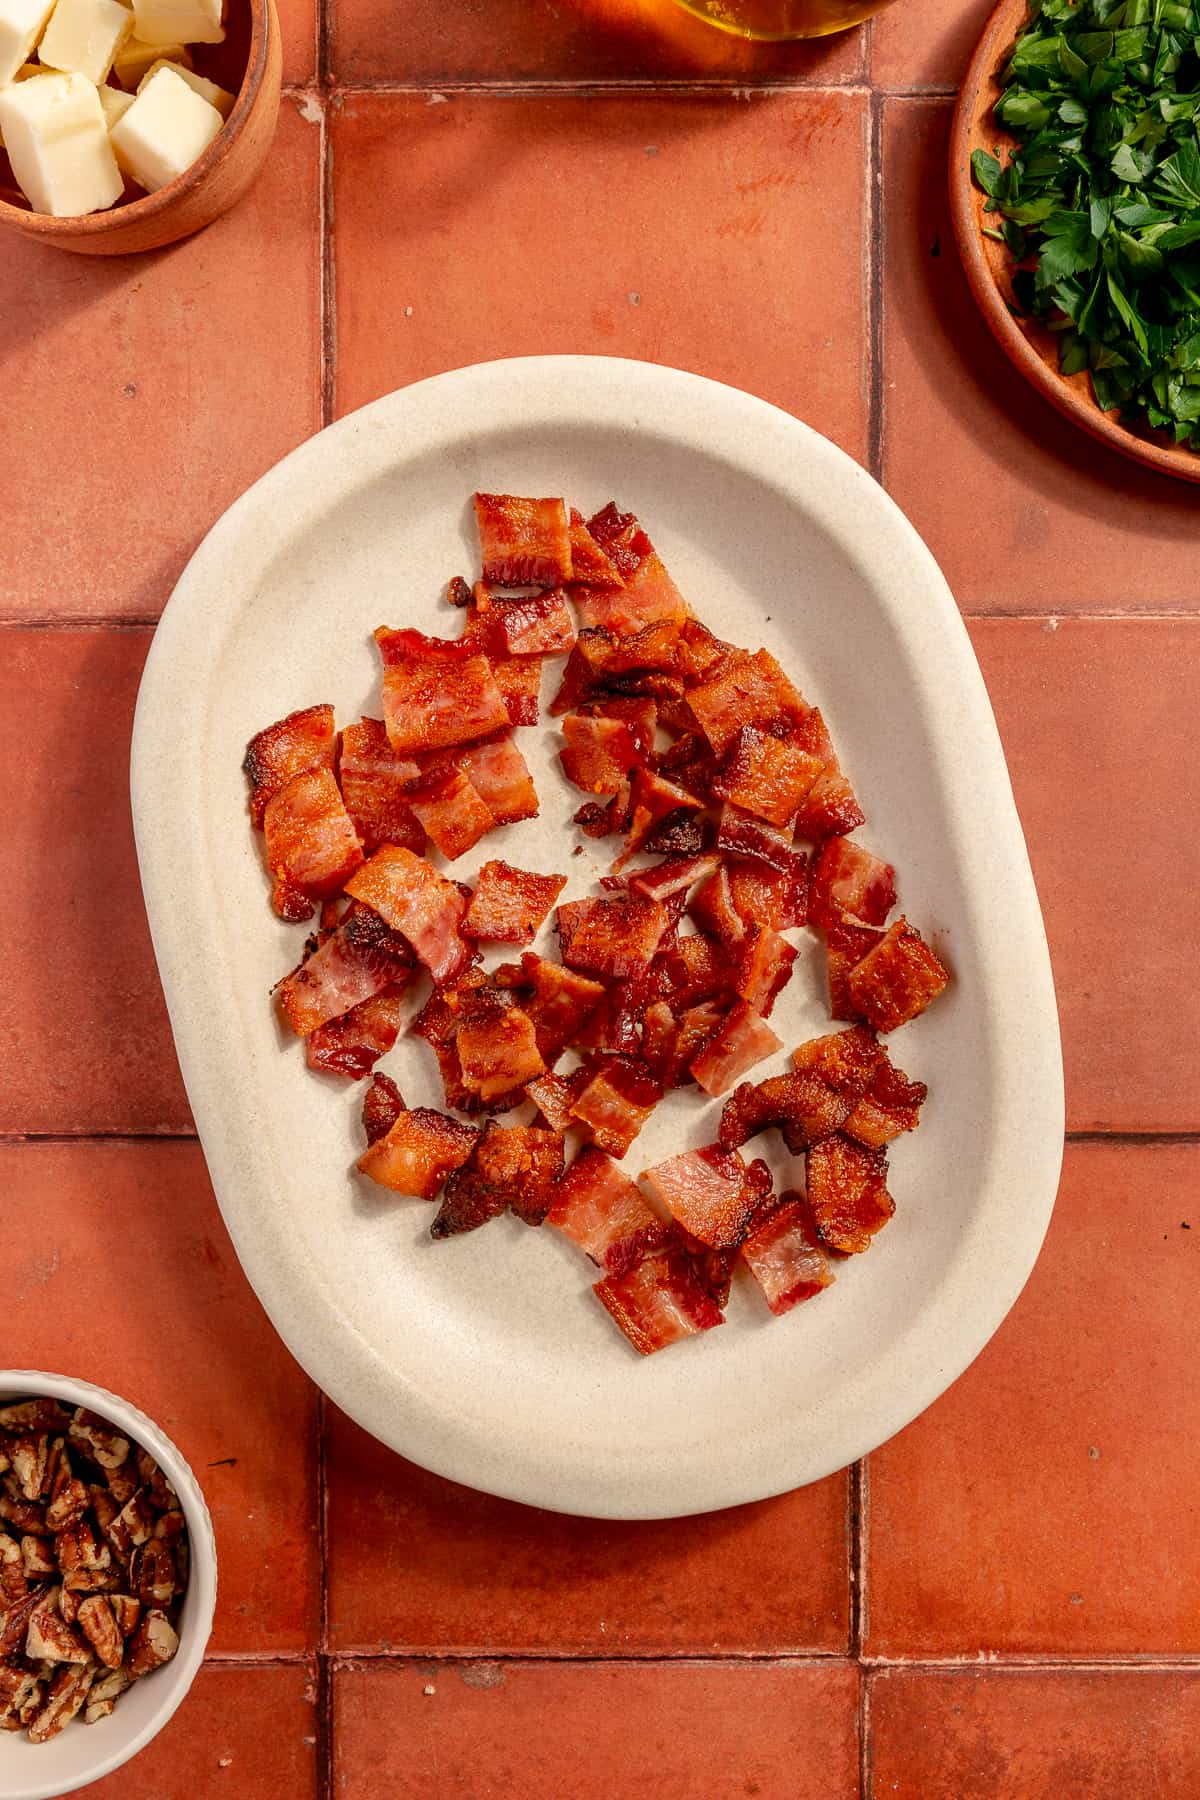 Chopped bacon on small plate.